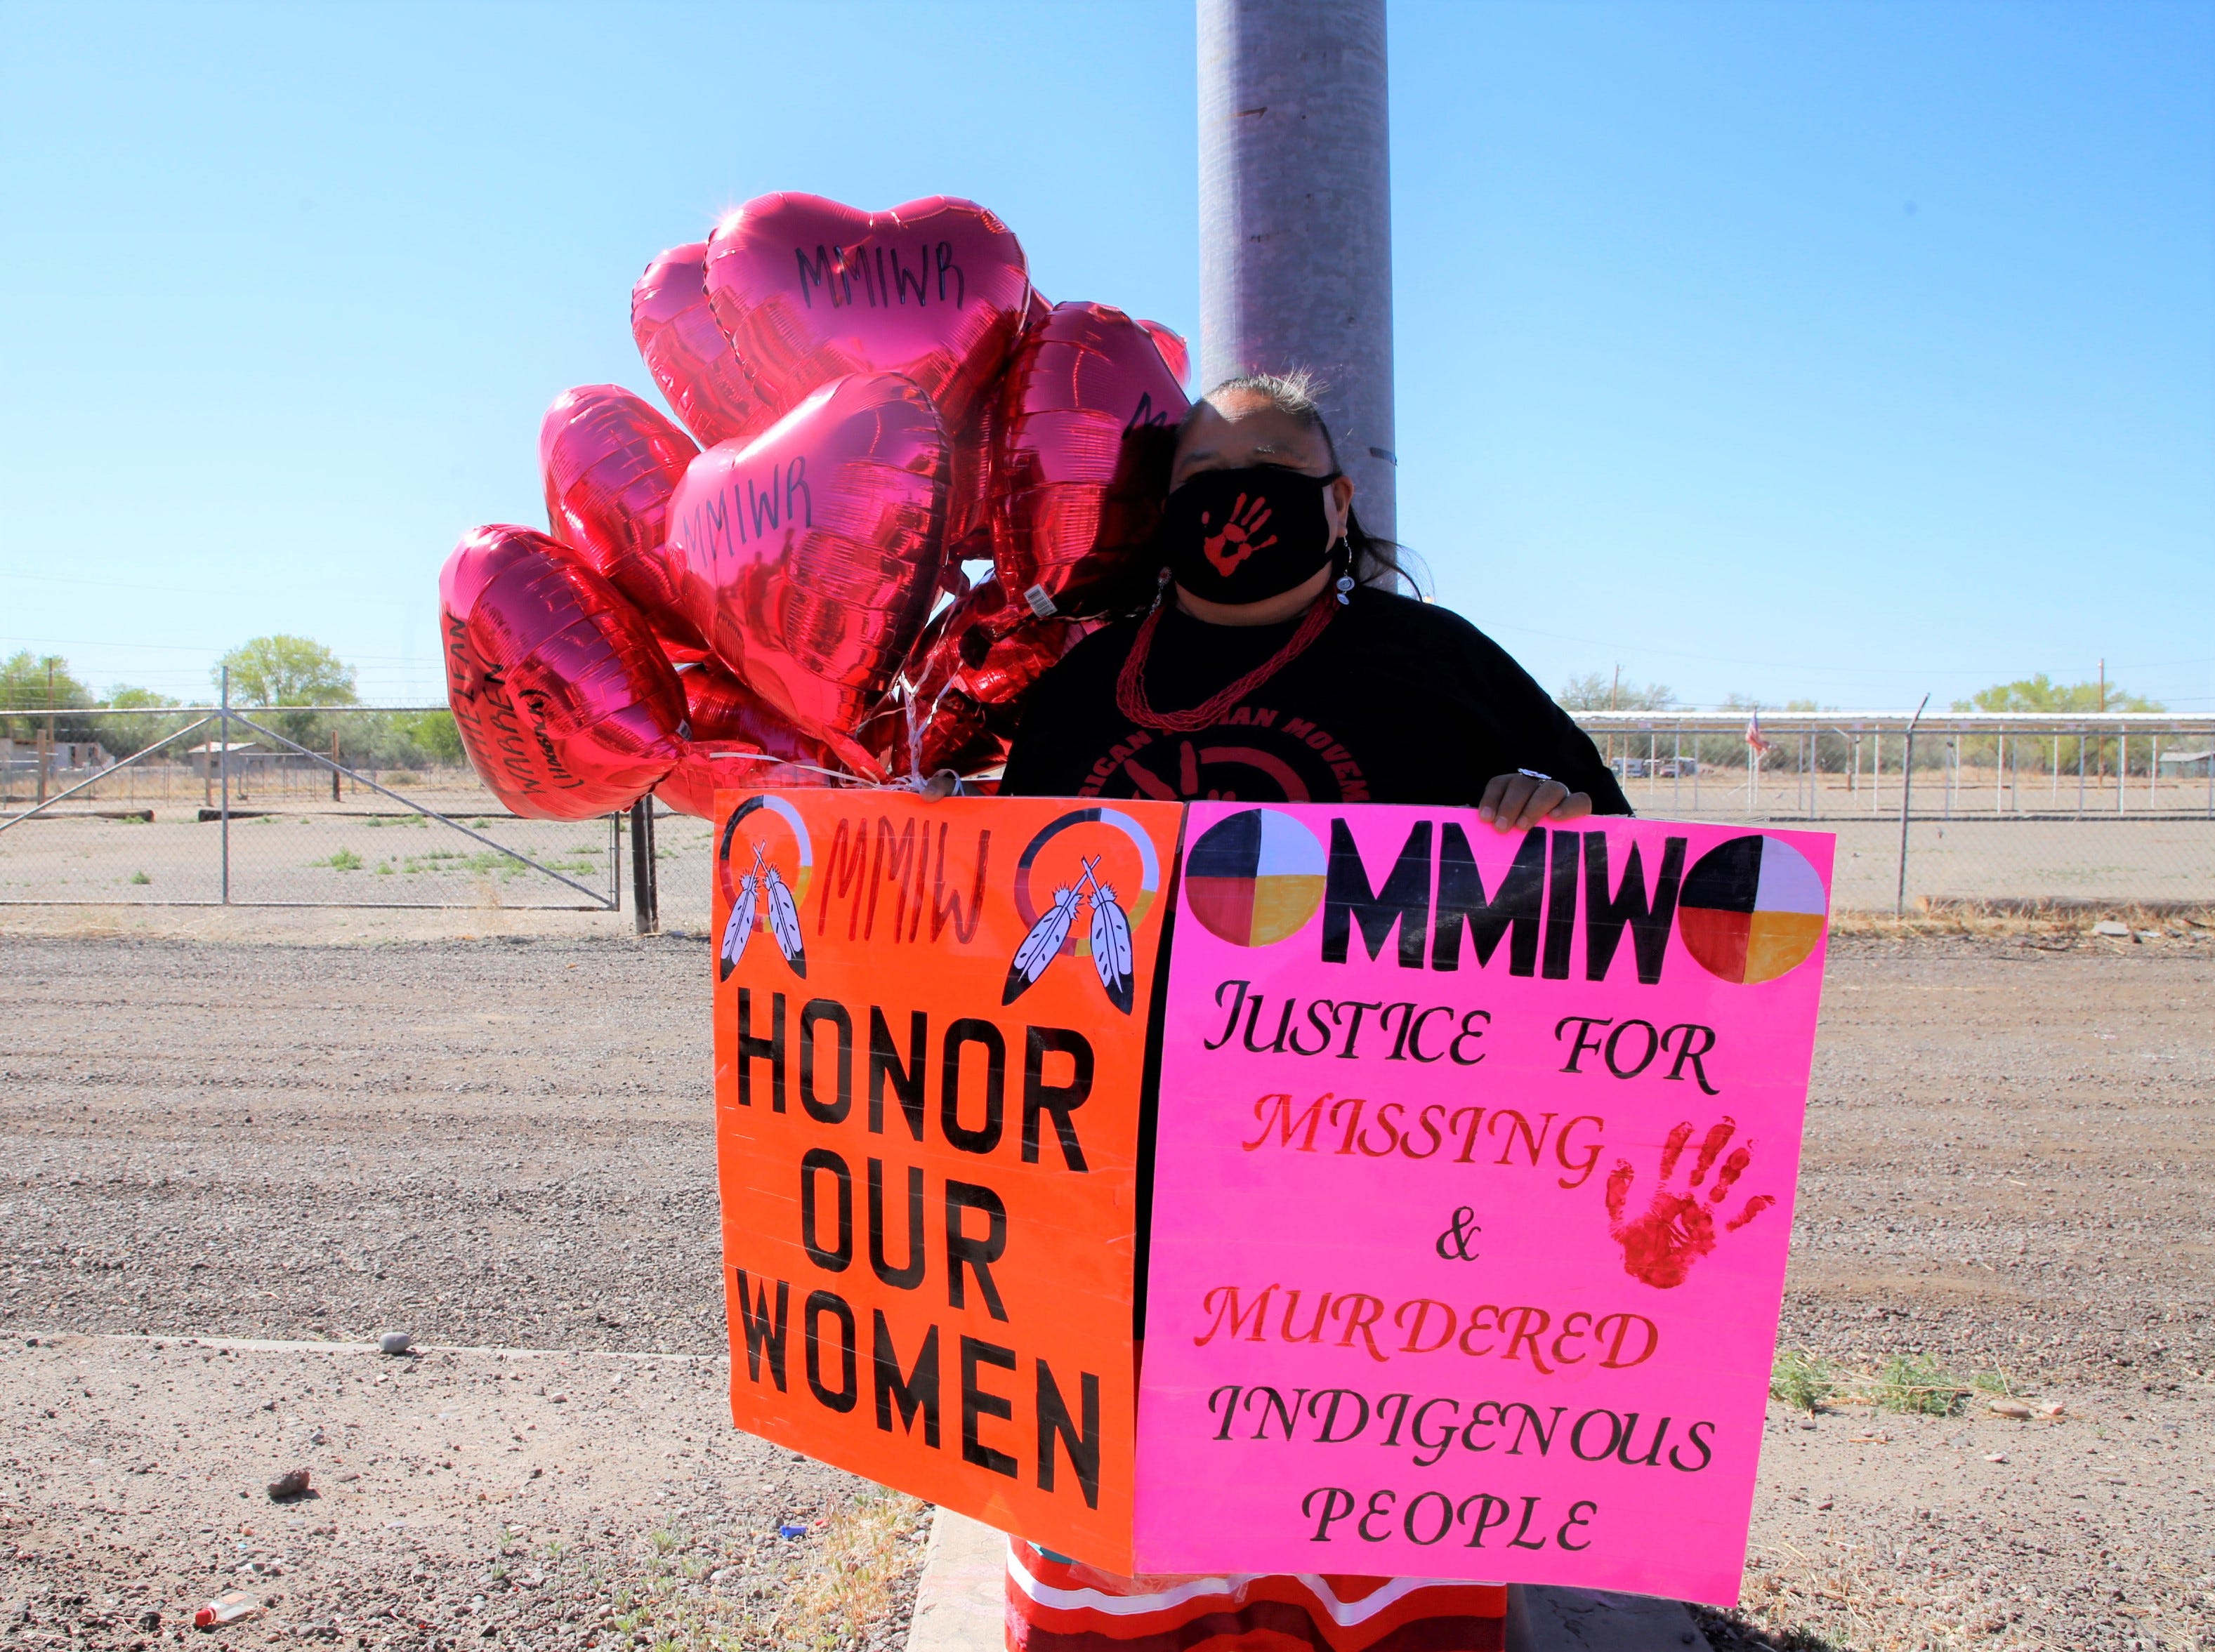 Lorita Jim-Sneak participated in the walk to raise awareness about missing persons on May 5 in Shiprock.